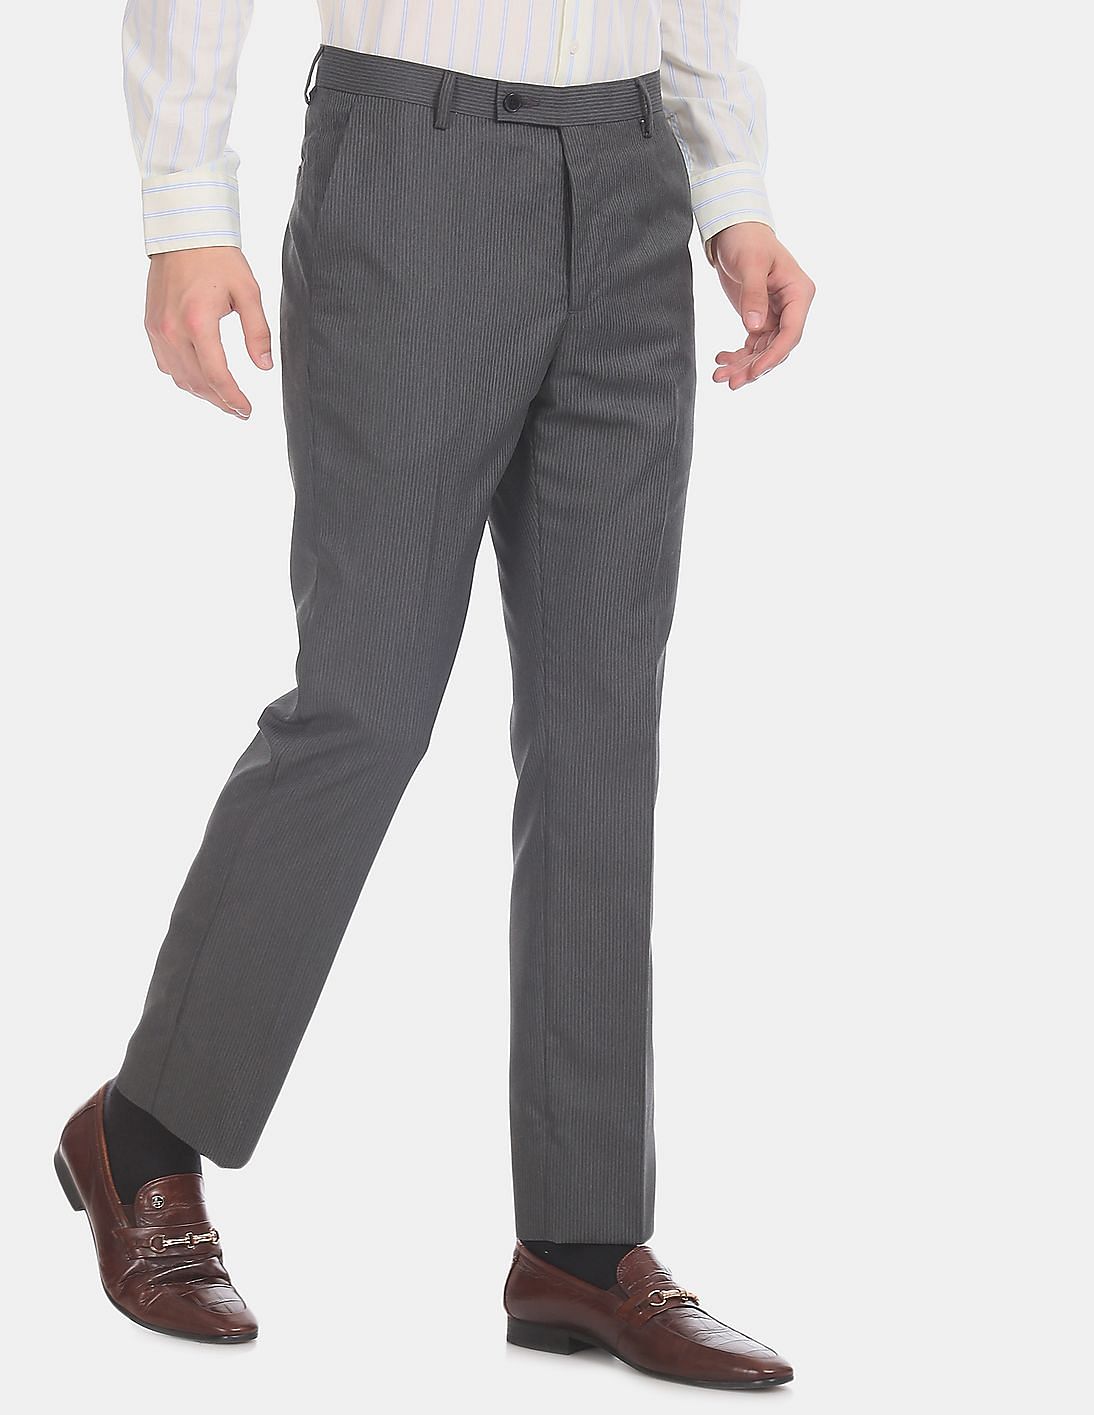 Buy Arrow Tapered Fit Patterned Stripe Formal Trousers - NNNOW.com